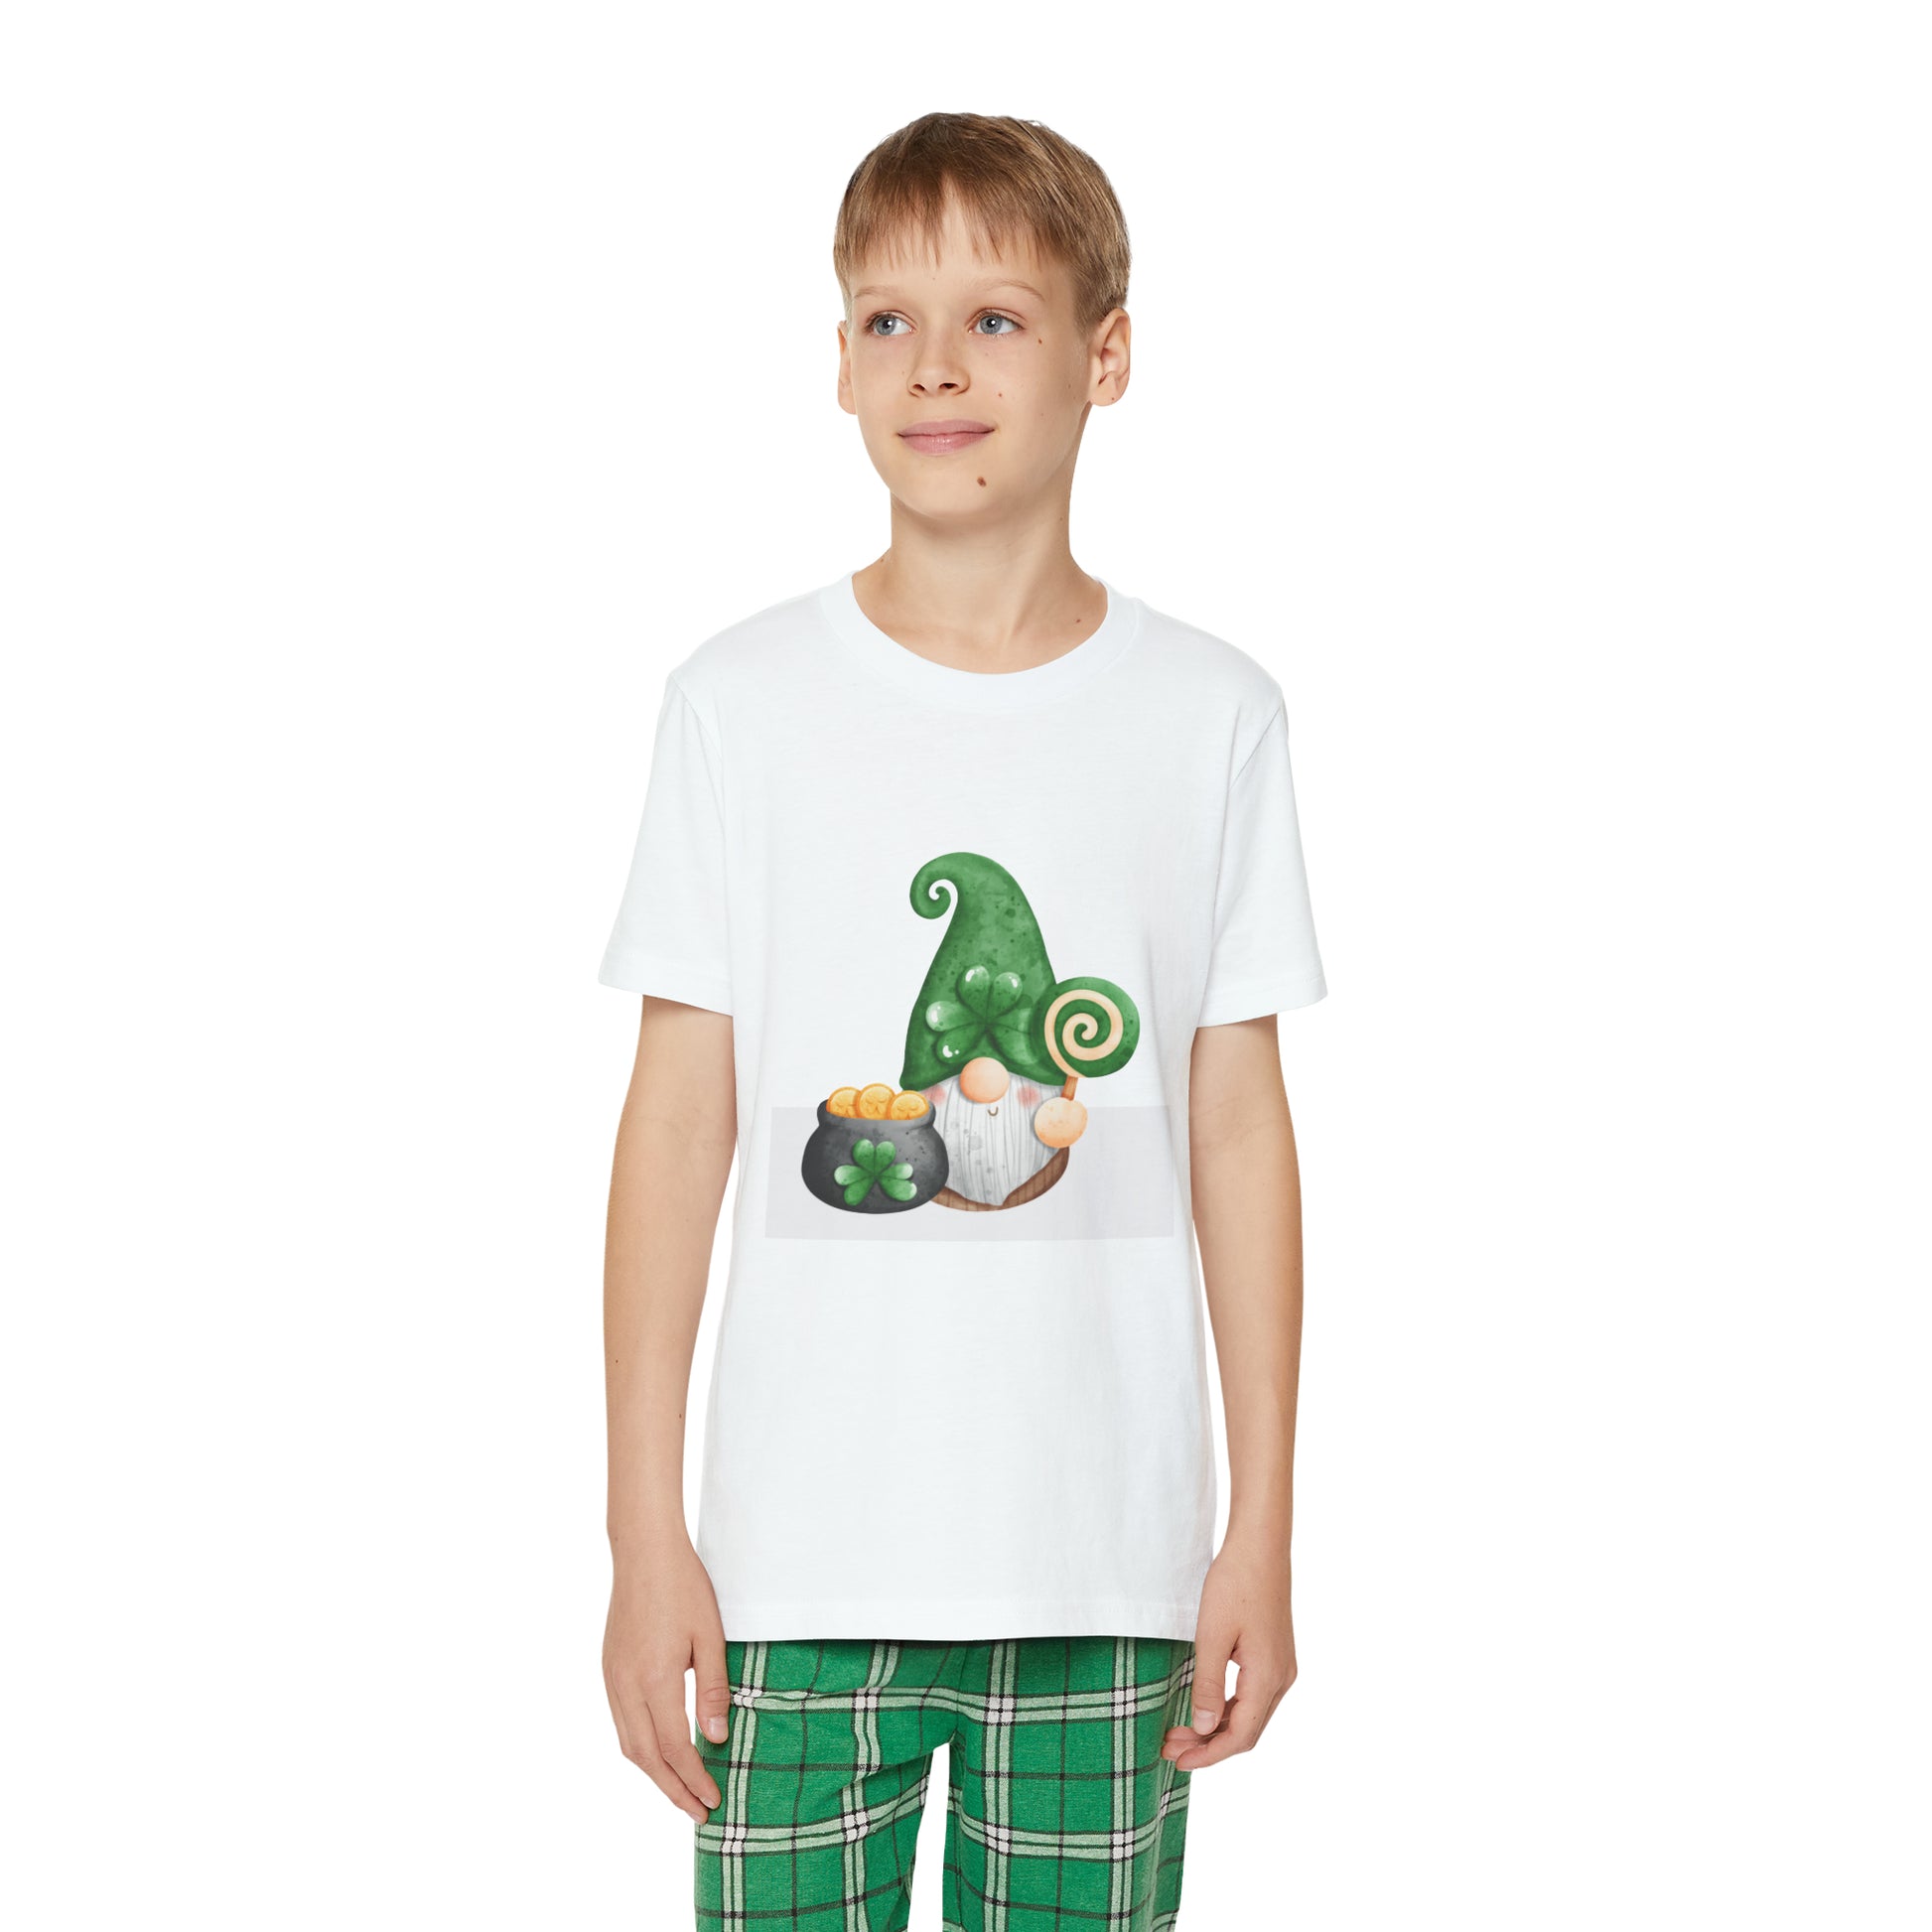 A young boy in a Printify Youth Unisex Pajama-Set with Short Sleeve and a green gnome image on his t-shirt.